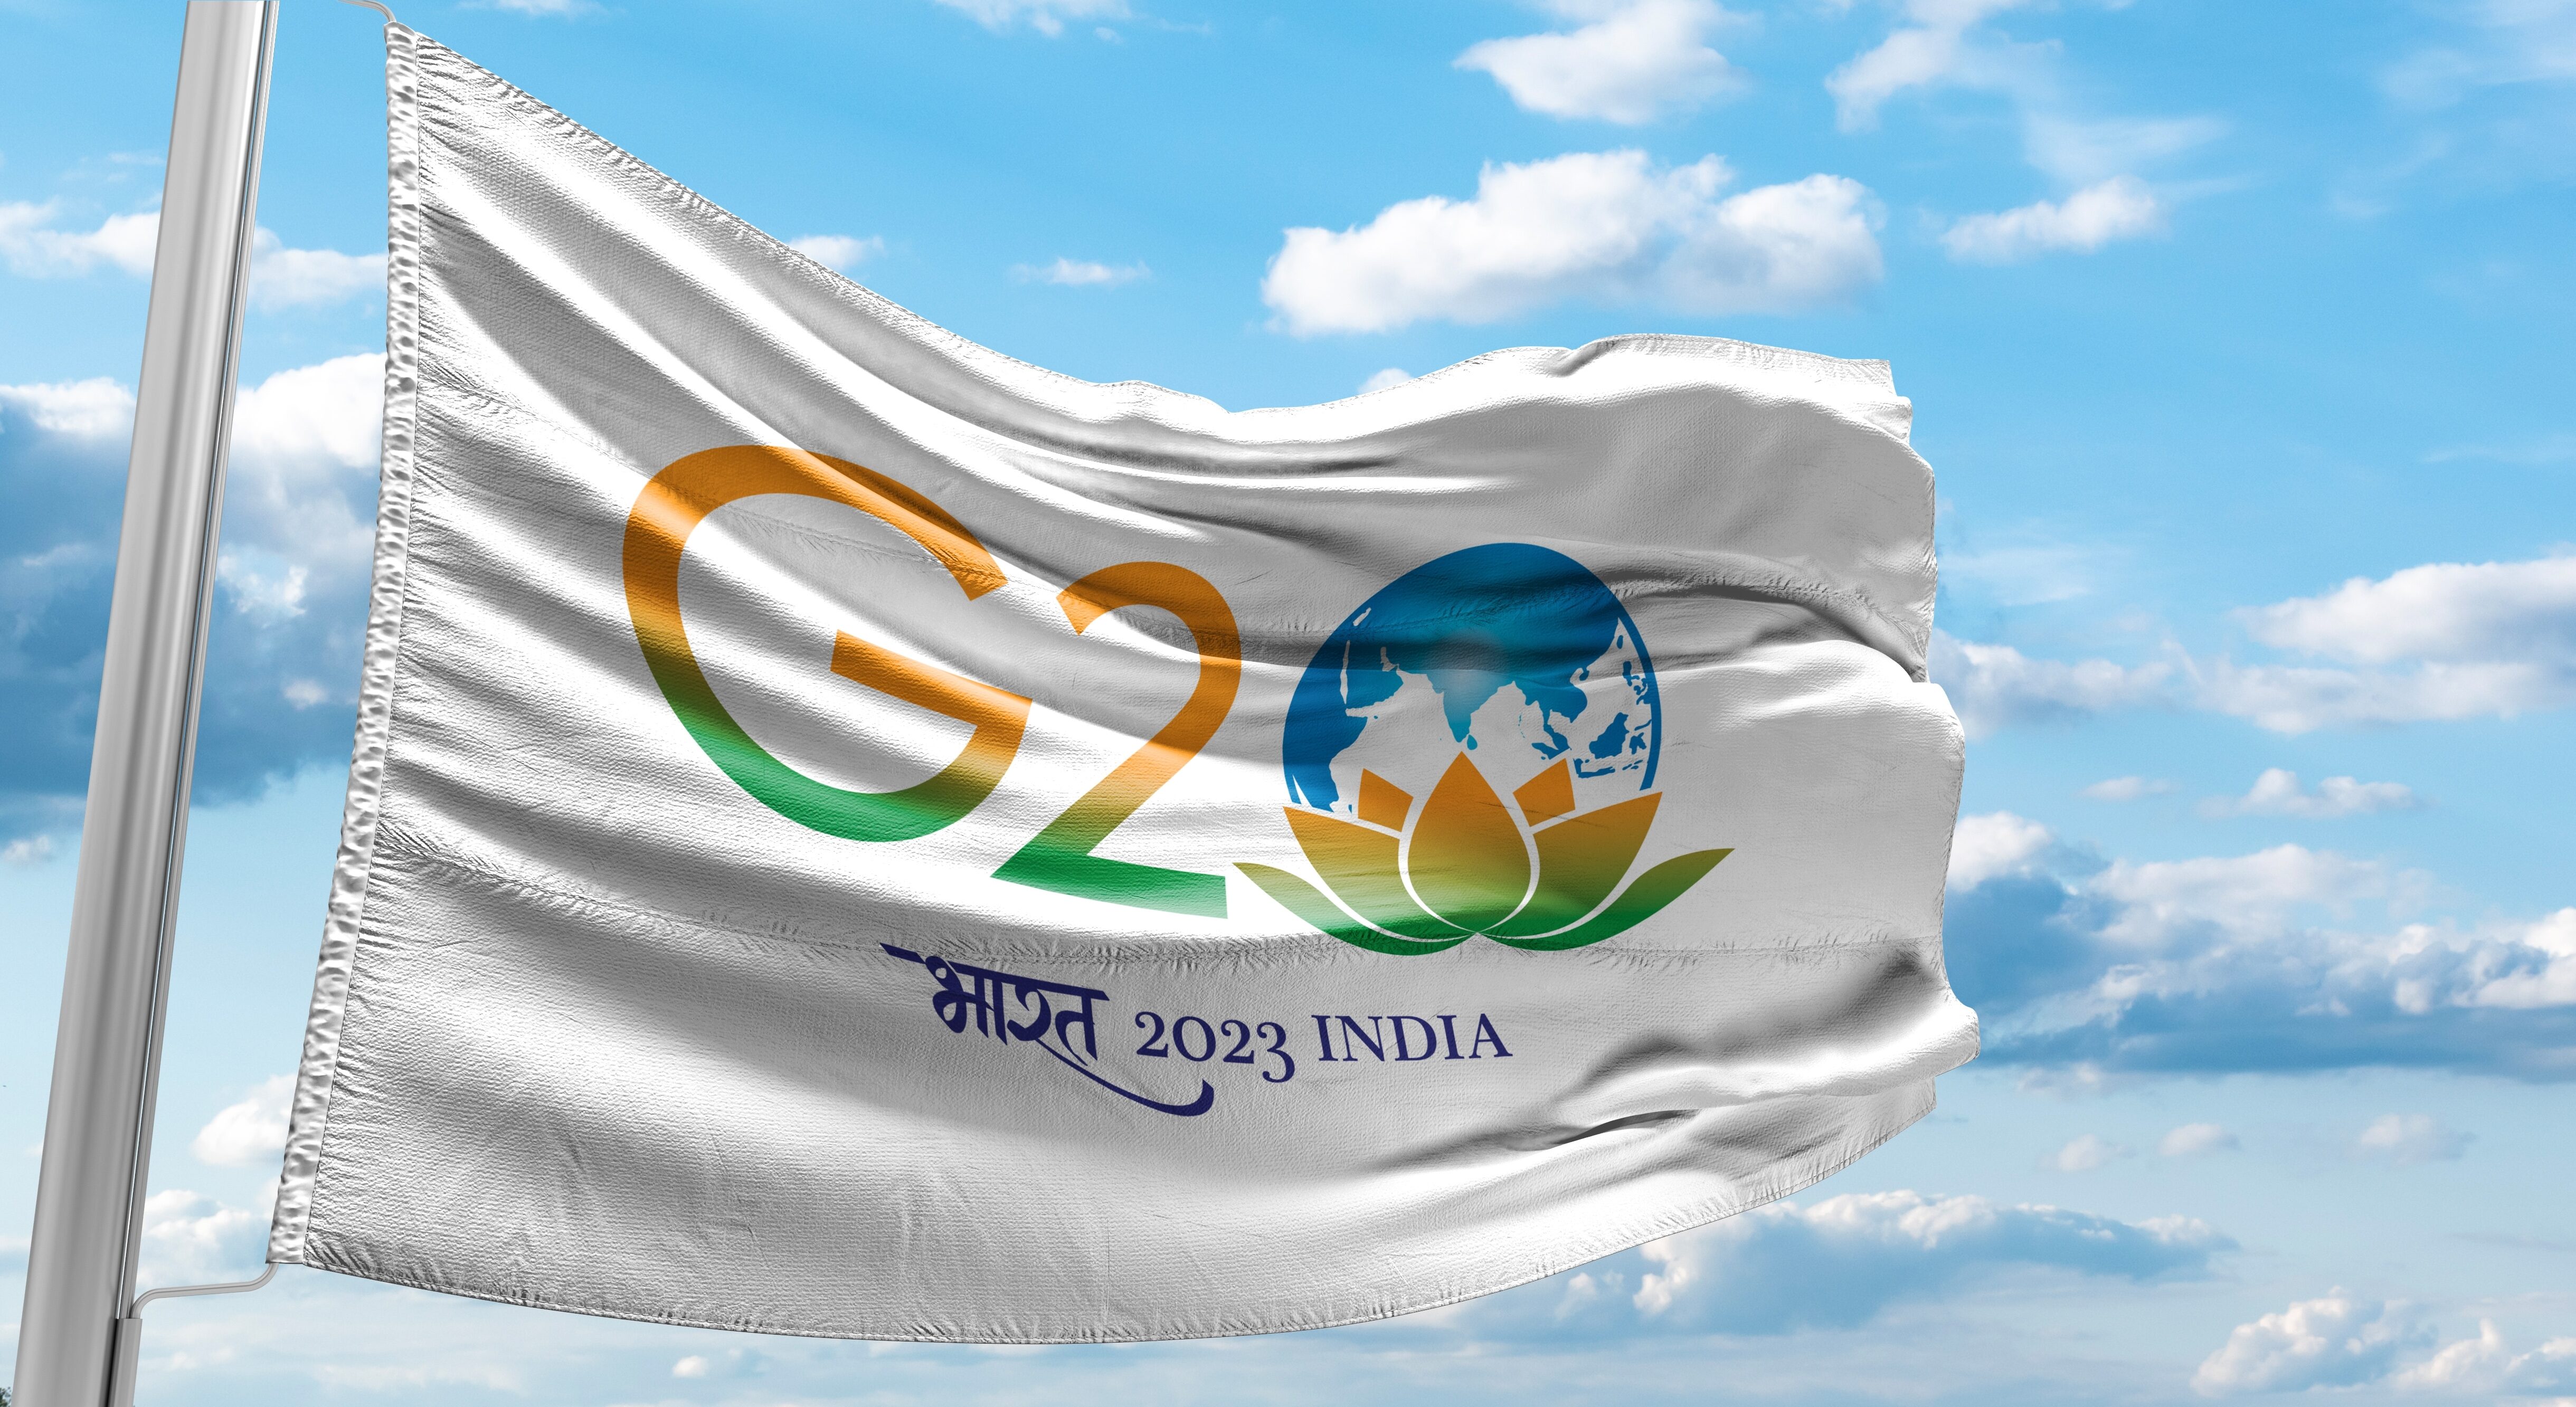 G20 Summit: The India-Middle East Corridor